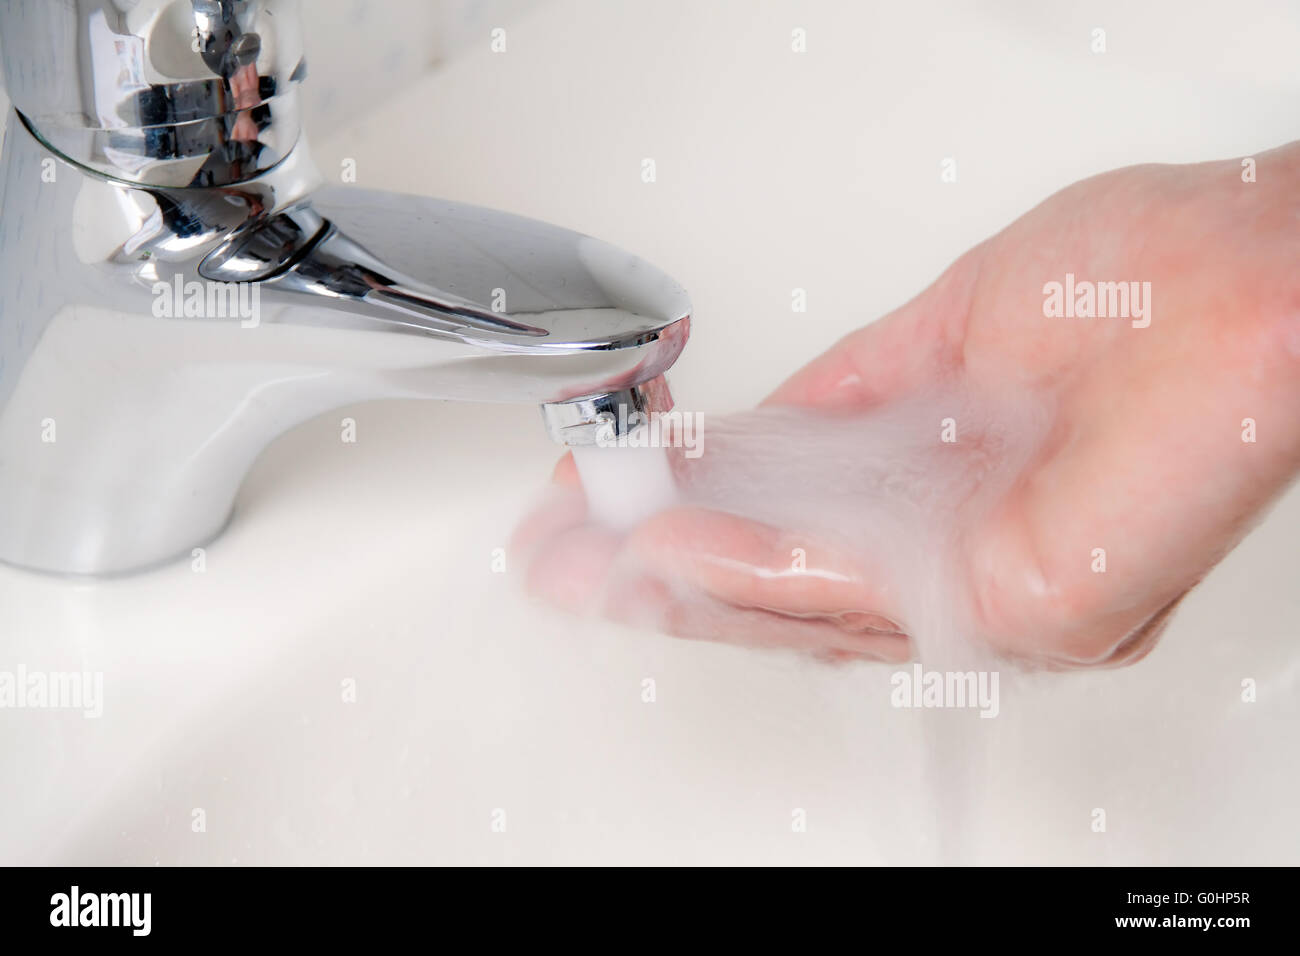 Wash hands. New protection against swine flu HN1 Stock Photo